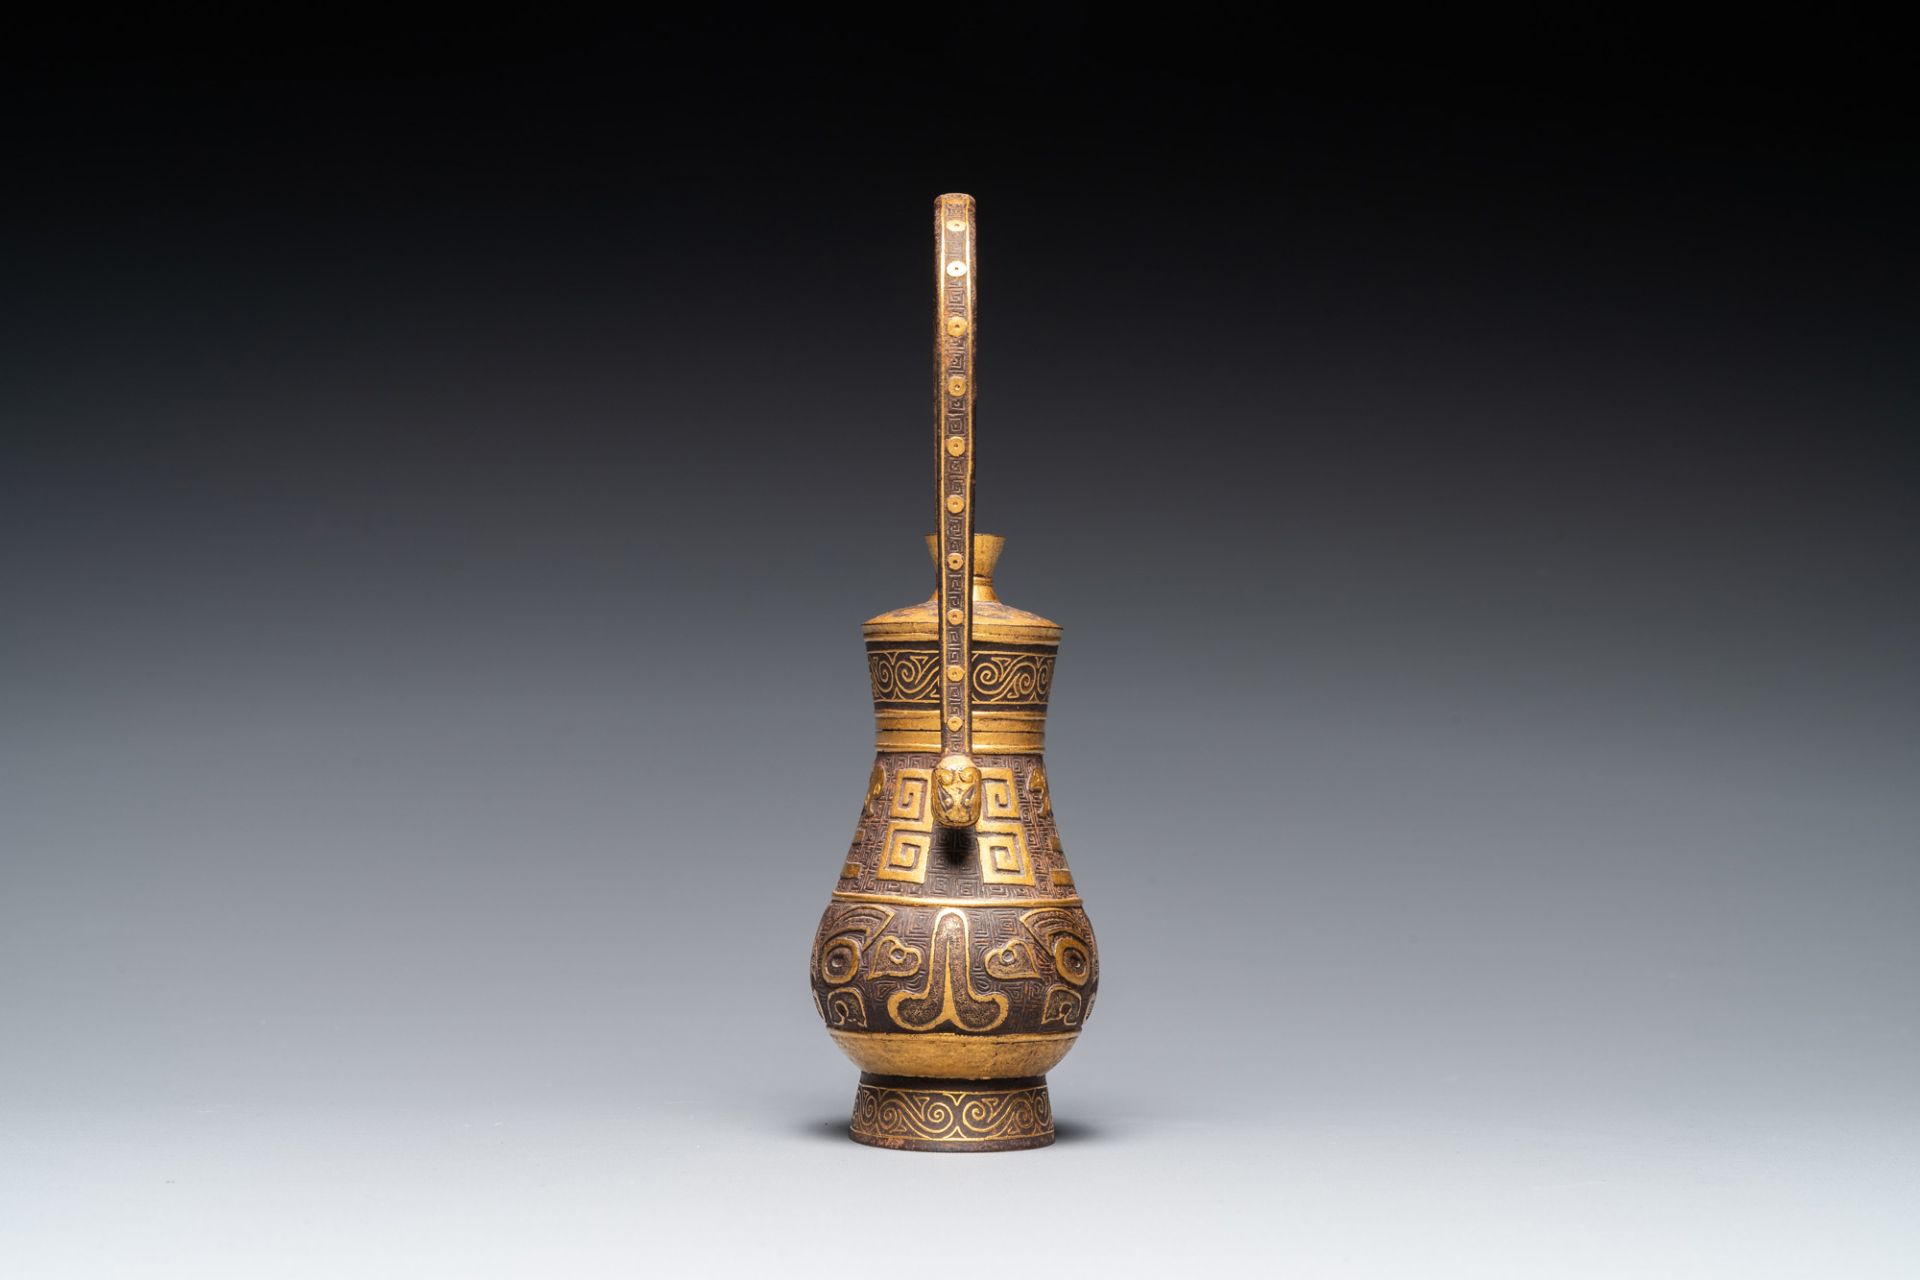 A Chinese gold-leaf-decorated cast iron vase and cover, probably 19th C. - Image 5 of 7